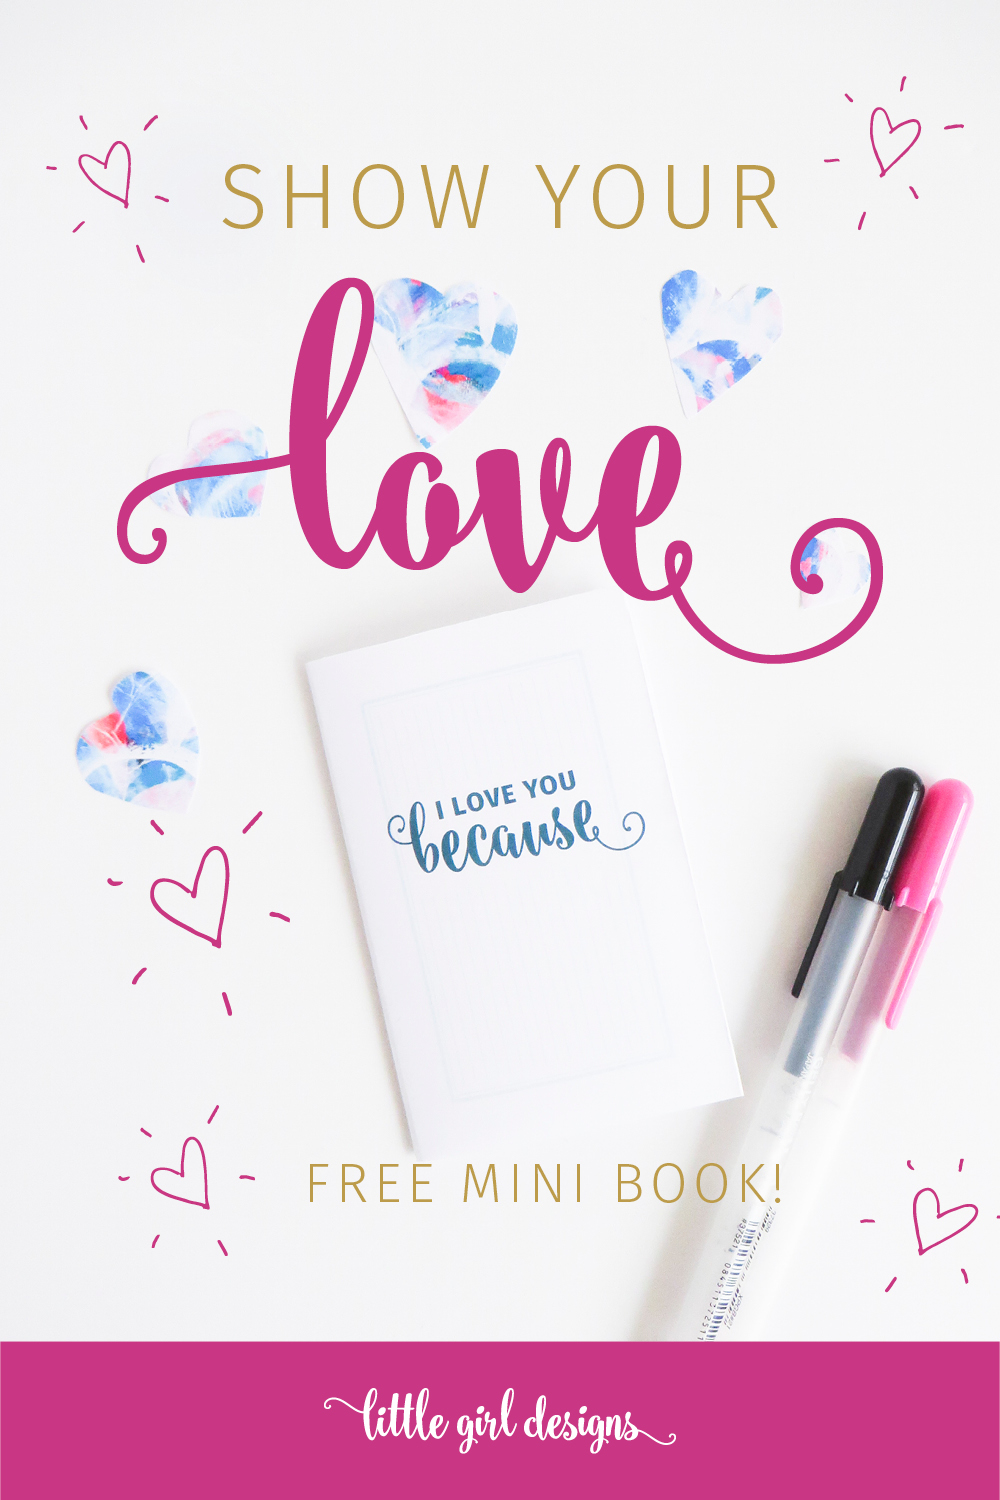 Download this free Valentine's Day mini book and give it to someone you LOVE! :) Perfect for Valentine's Day, birthdays, anniversaries, or any time you want to share your love.